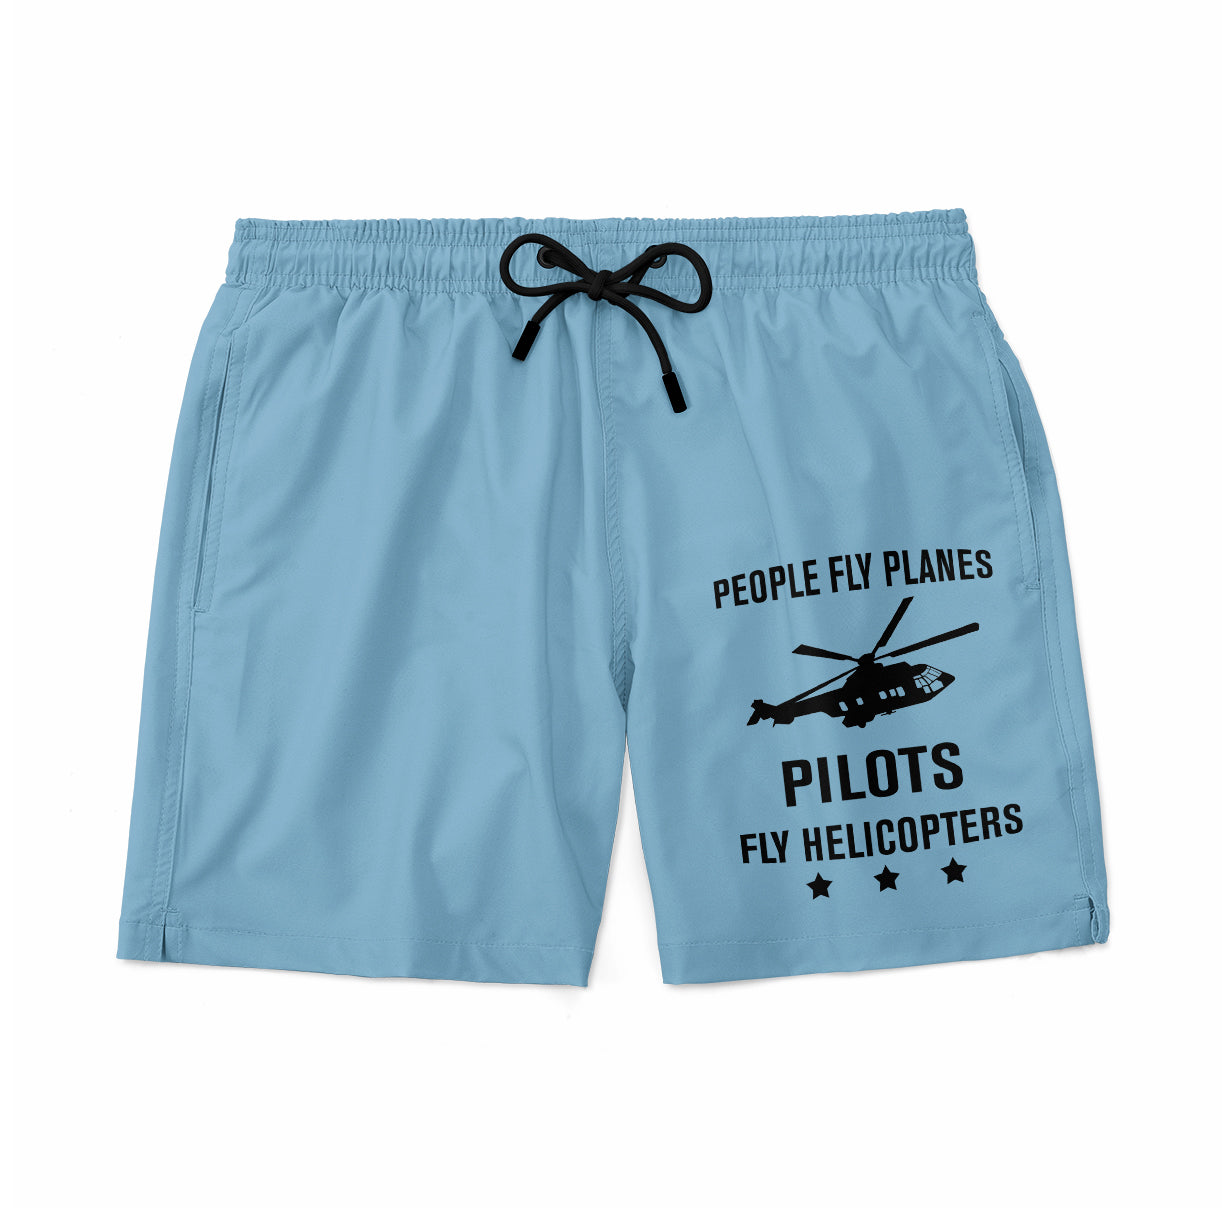 People Fly Planes Pilots Fly Helicopters Designed Swim Trunks & Shorts